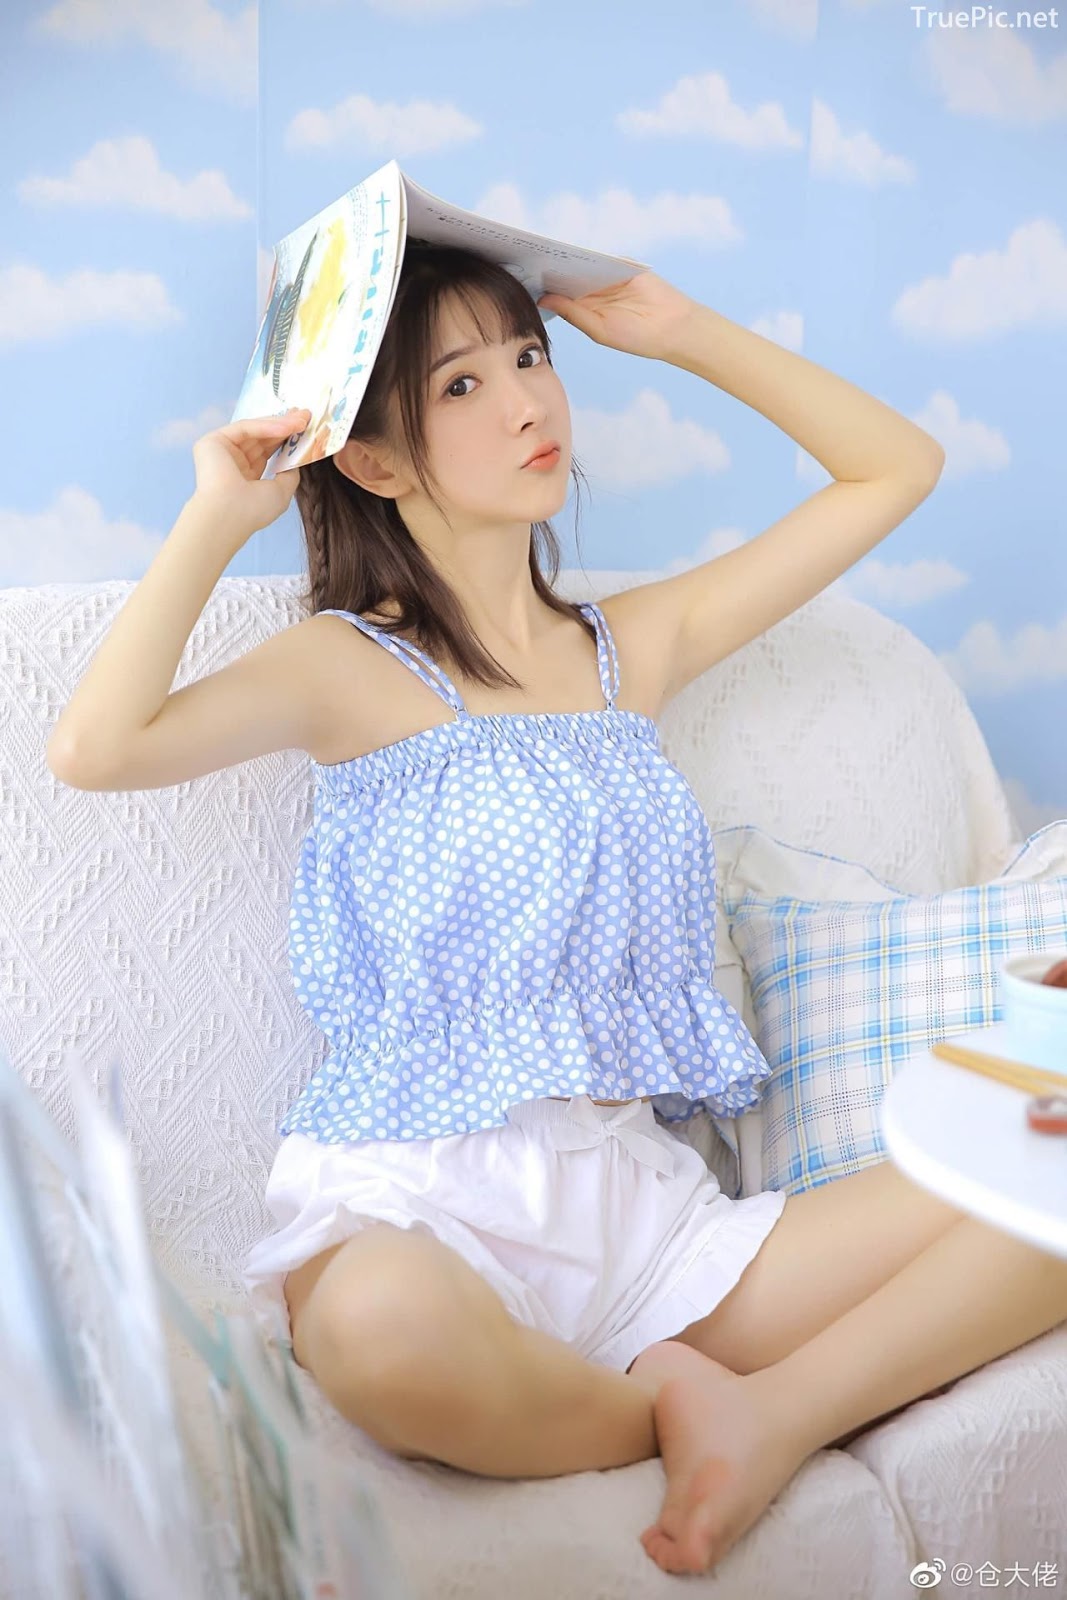 Chinese cute girl - She is a Beautiful sweet candy girl - TruePic.net - Picture 14